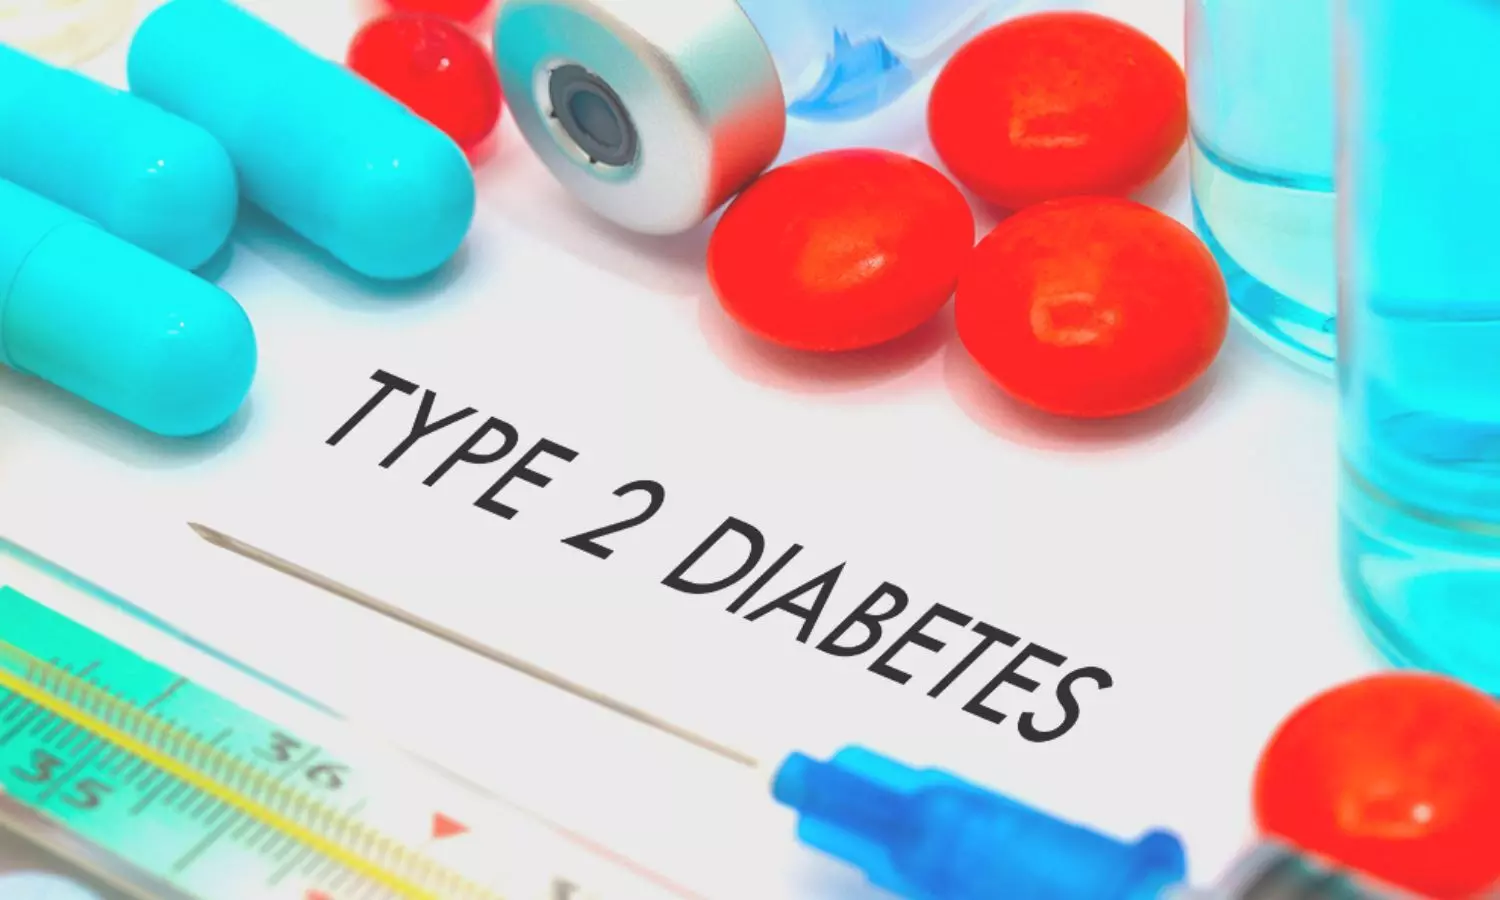 Empagliflozin as add-on therapy improves quality of life in diabetes patients